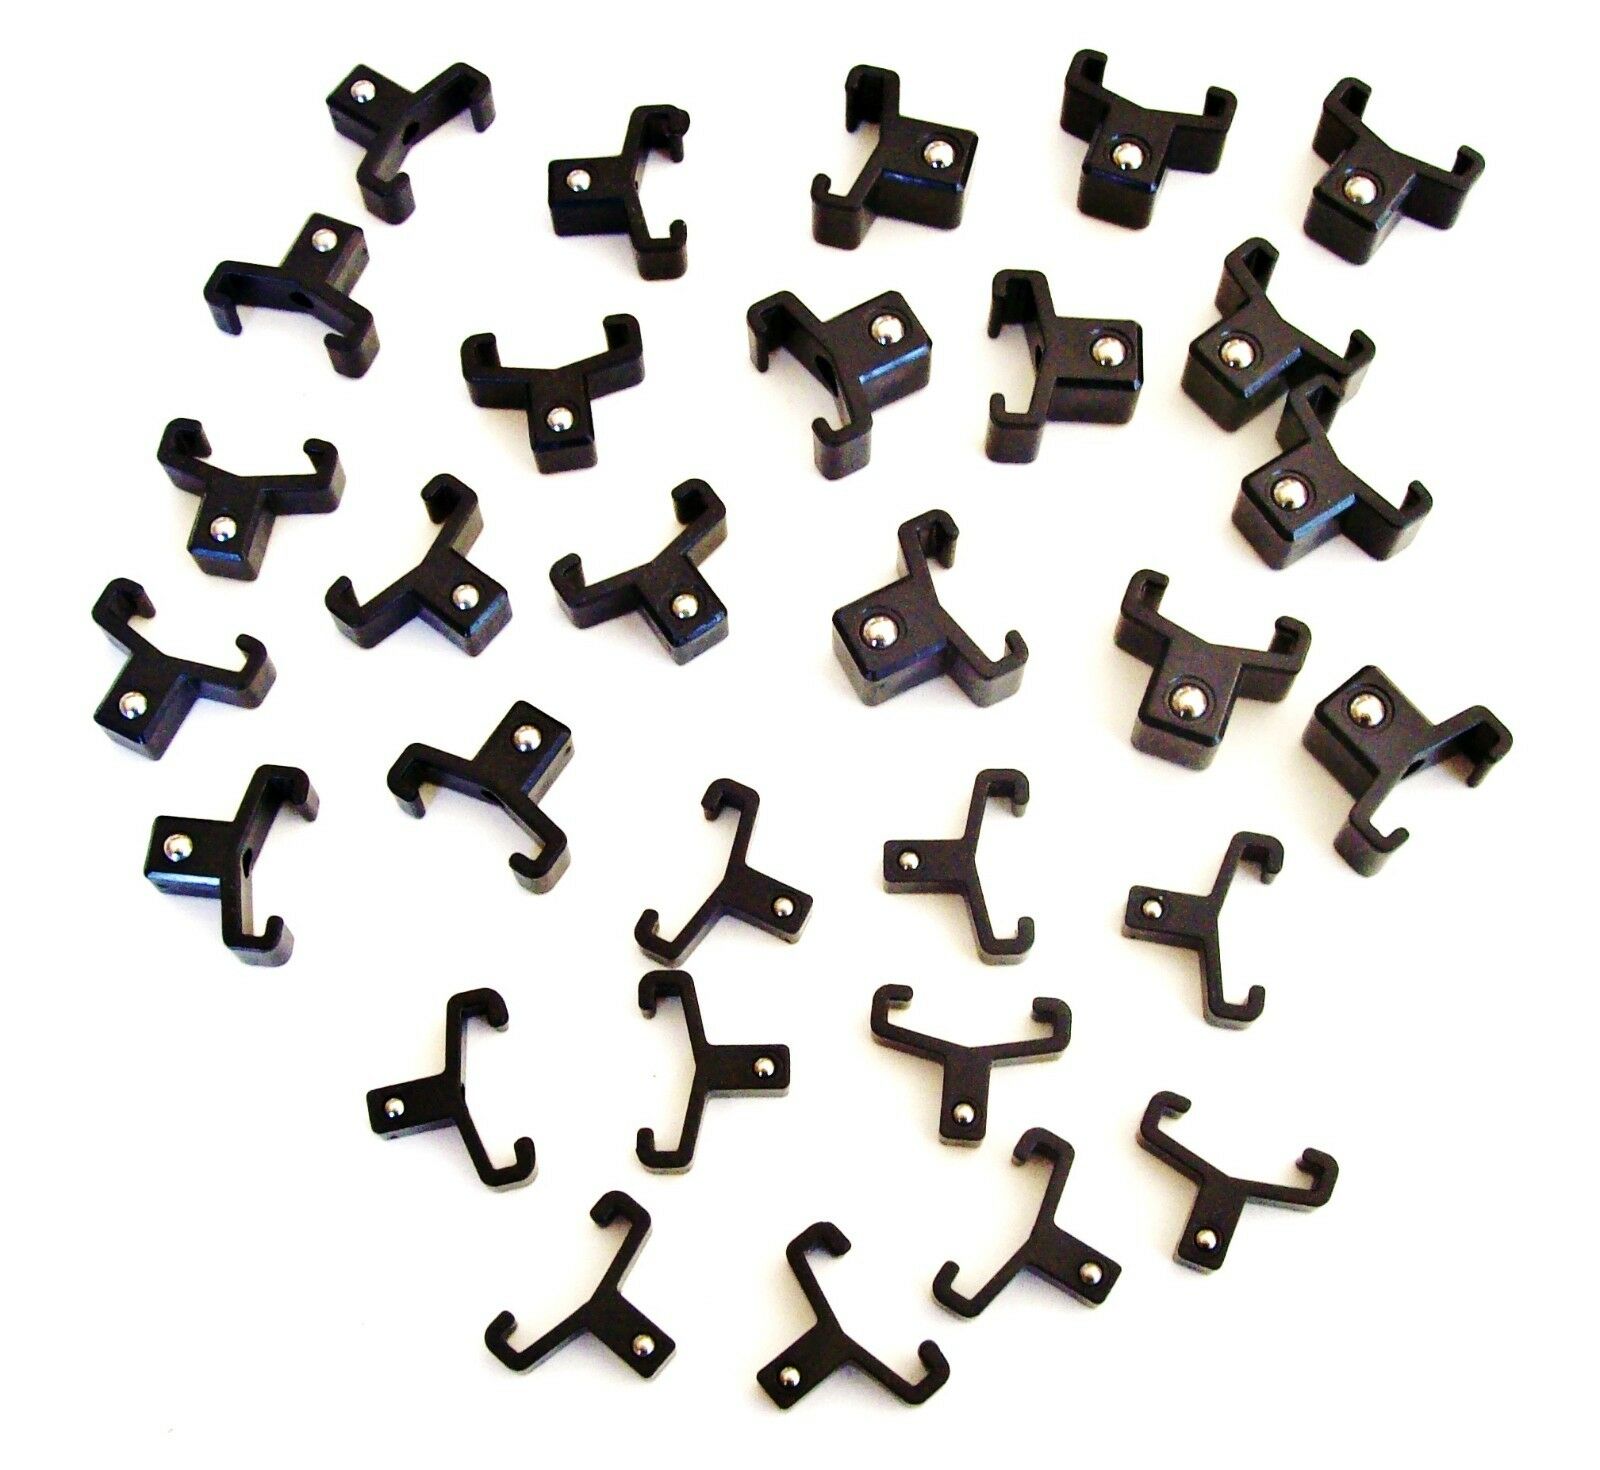 30 GOLIATH INDUSTRIAL ABS 1/4, 3/8, 1/2 BLACK REPLACEMENT SOCKET RACK RAIL CLIPS